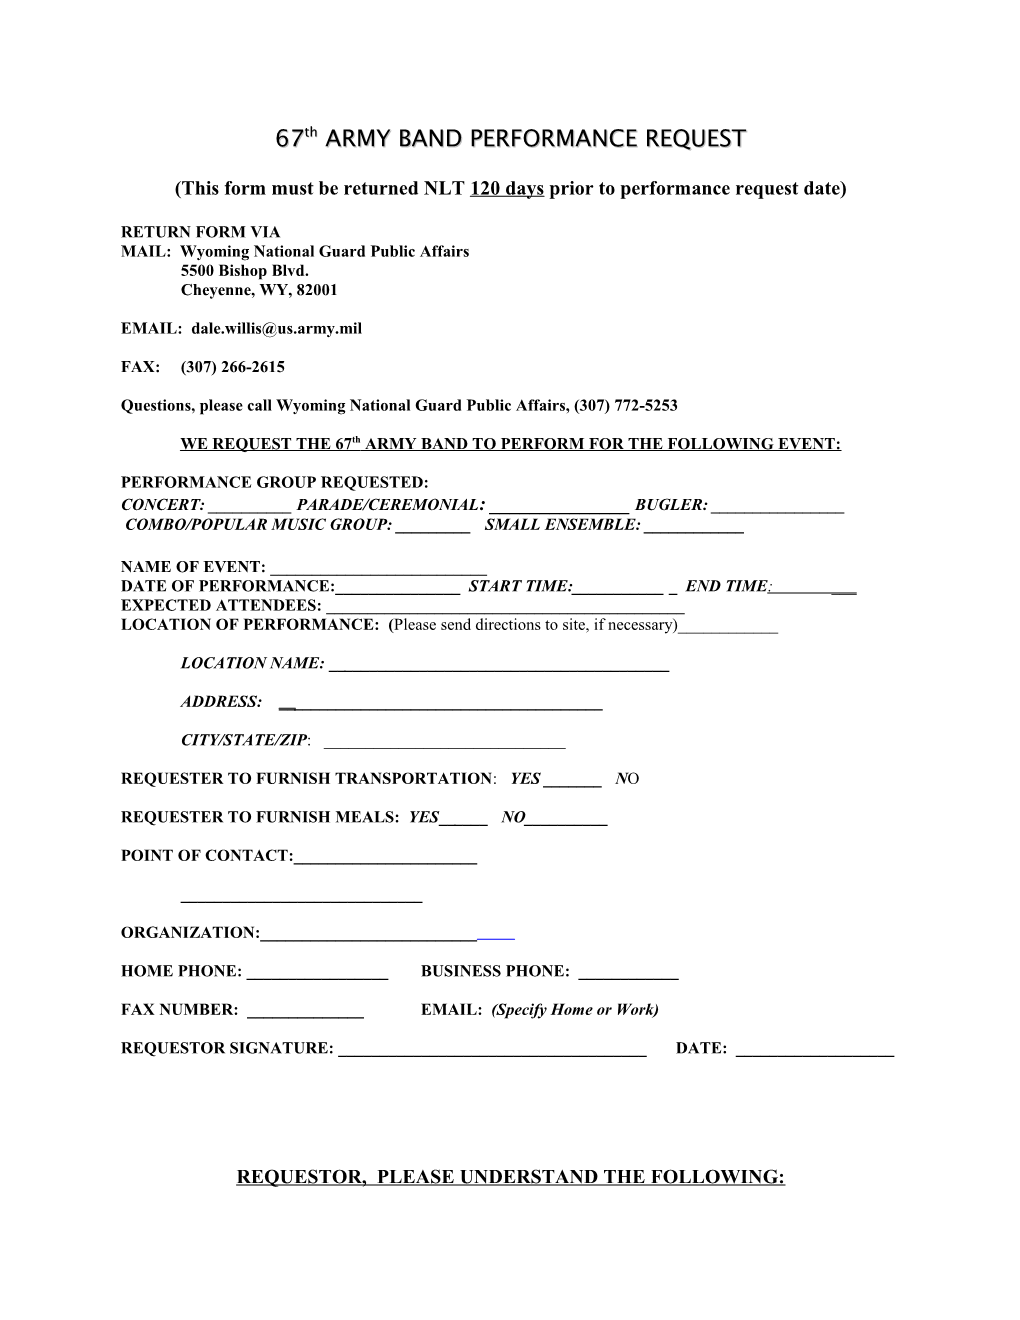 This Form Must Be Returned NLT 120Days Prior to Performance Request Date